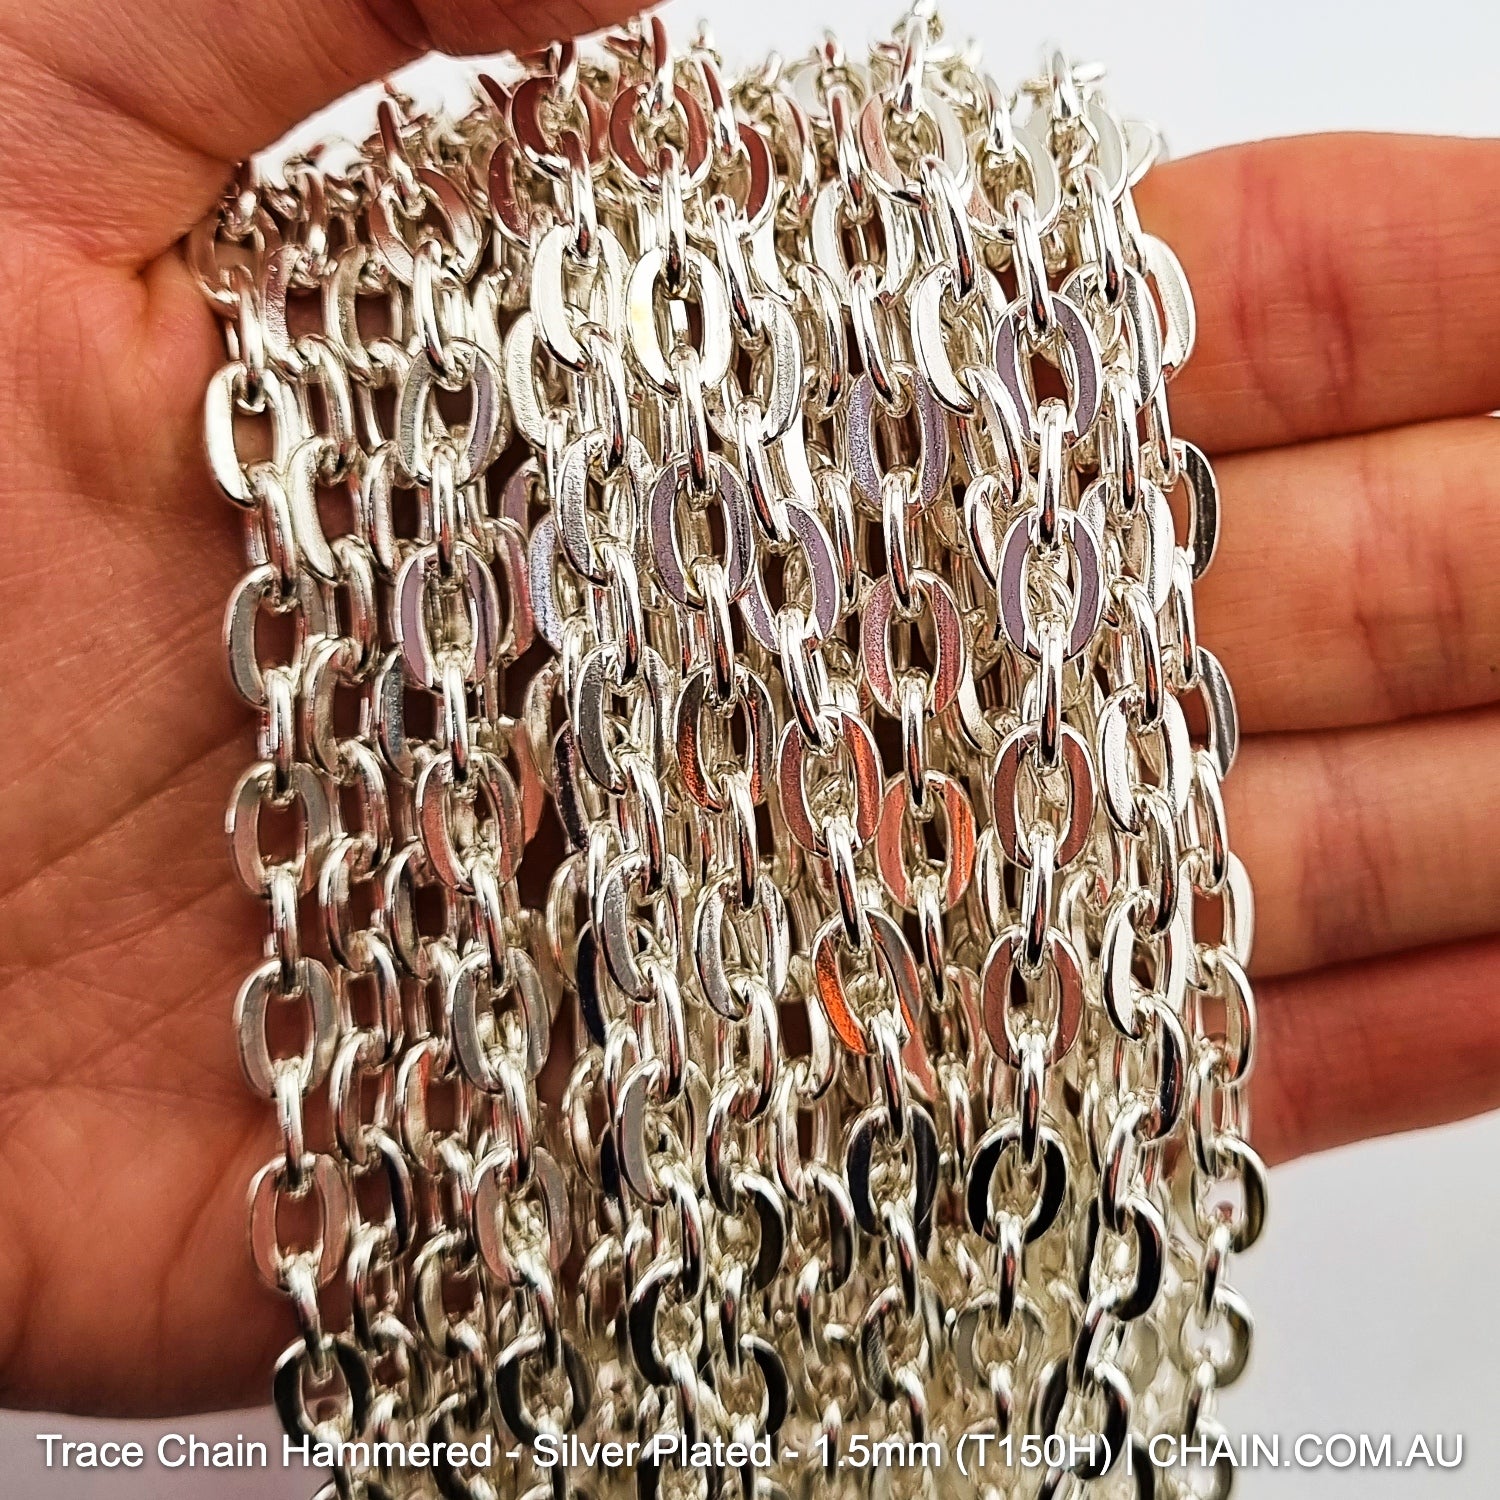 Hammered Trace Chain in a Silver Plated Finish. Size: 1.5mm, T150H. Jewellery Chain, Australia wide shipping. Shop chain.com.au